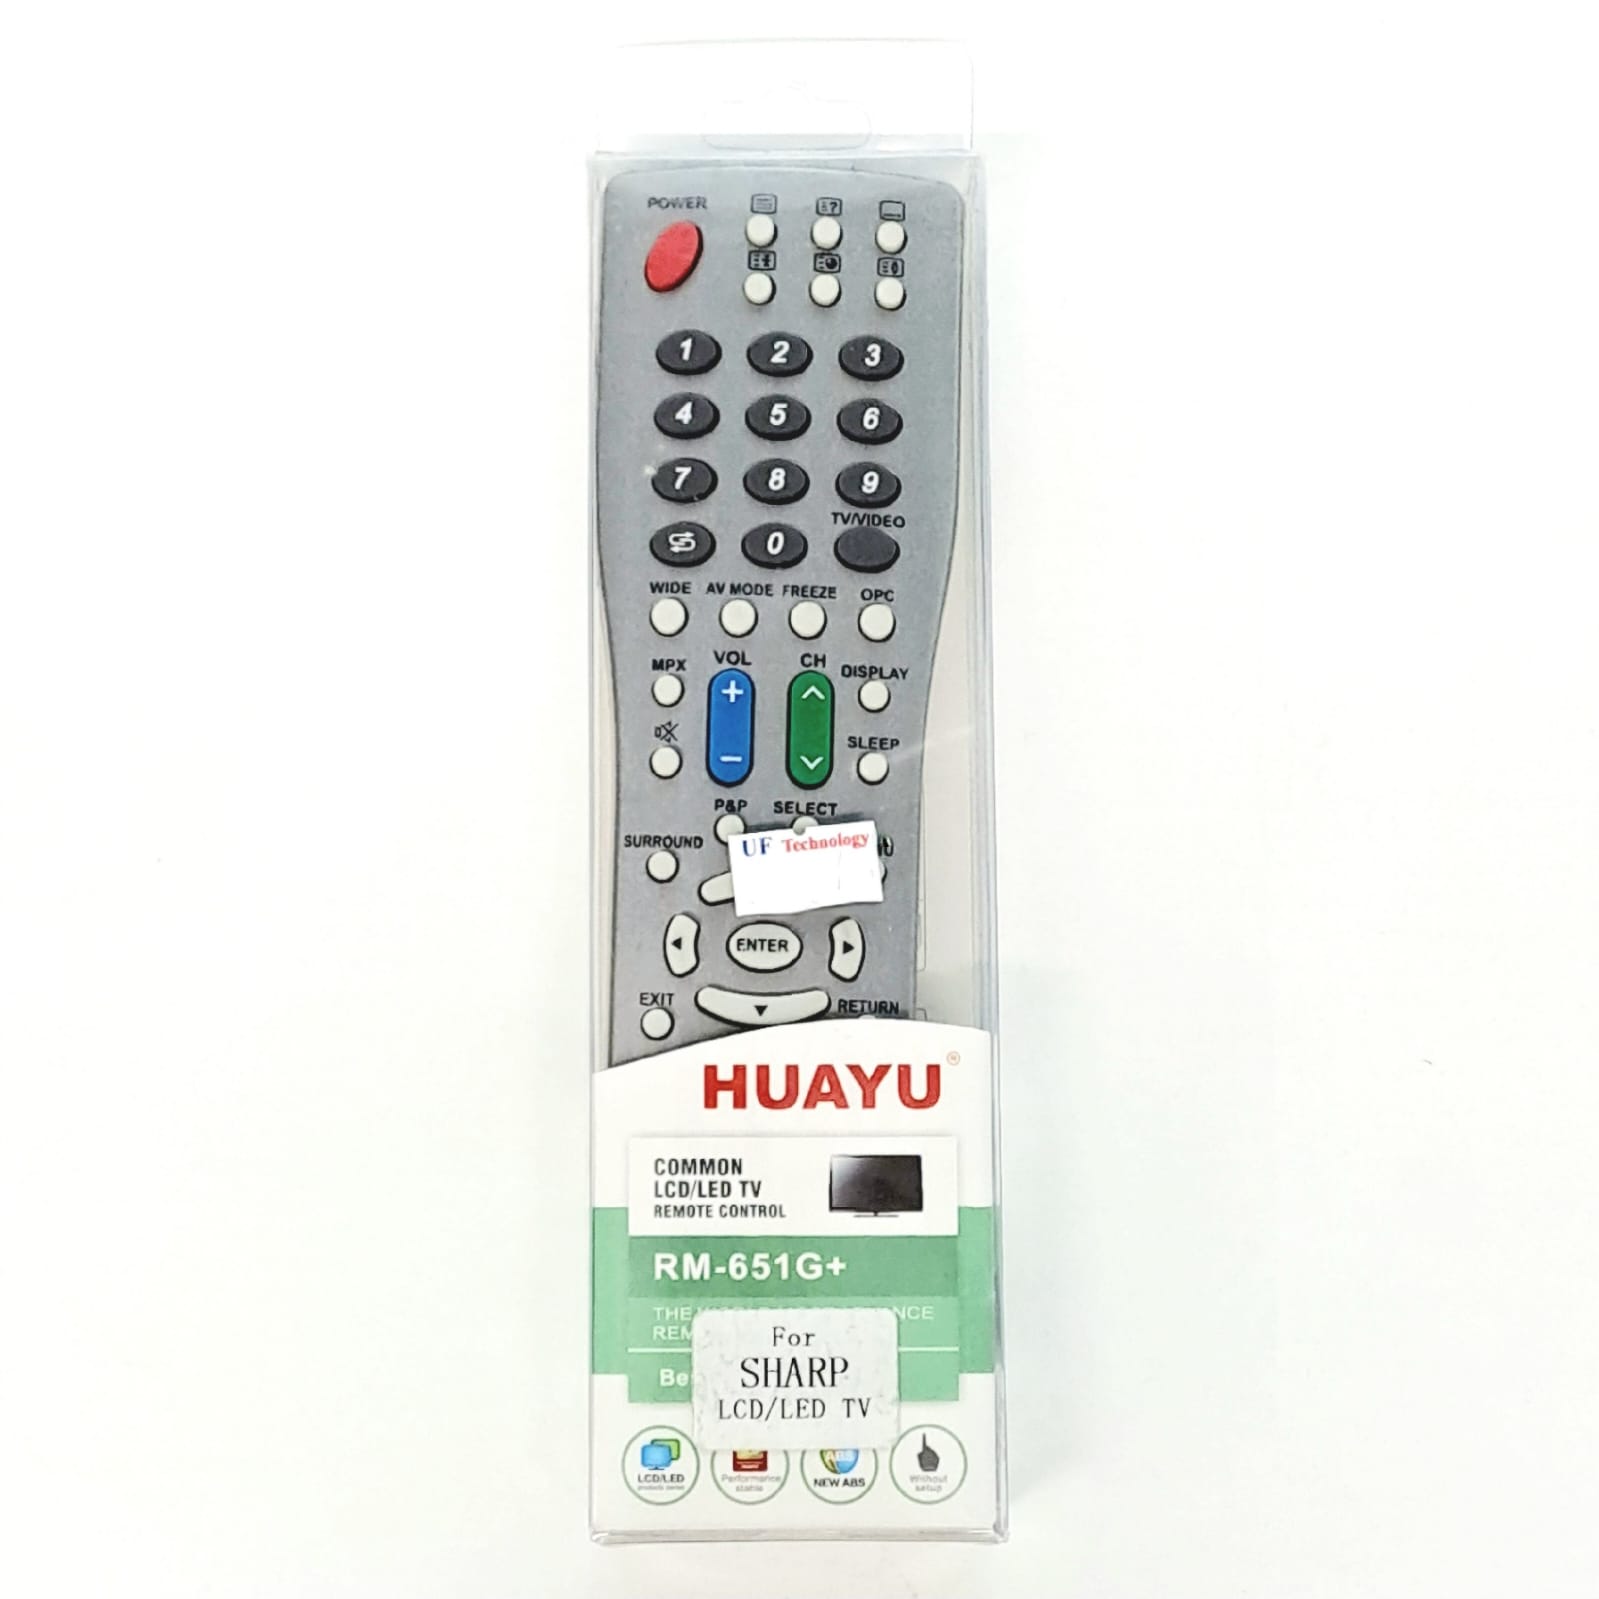 RM-651G+ Universal Remote Control for Sharp TVs